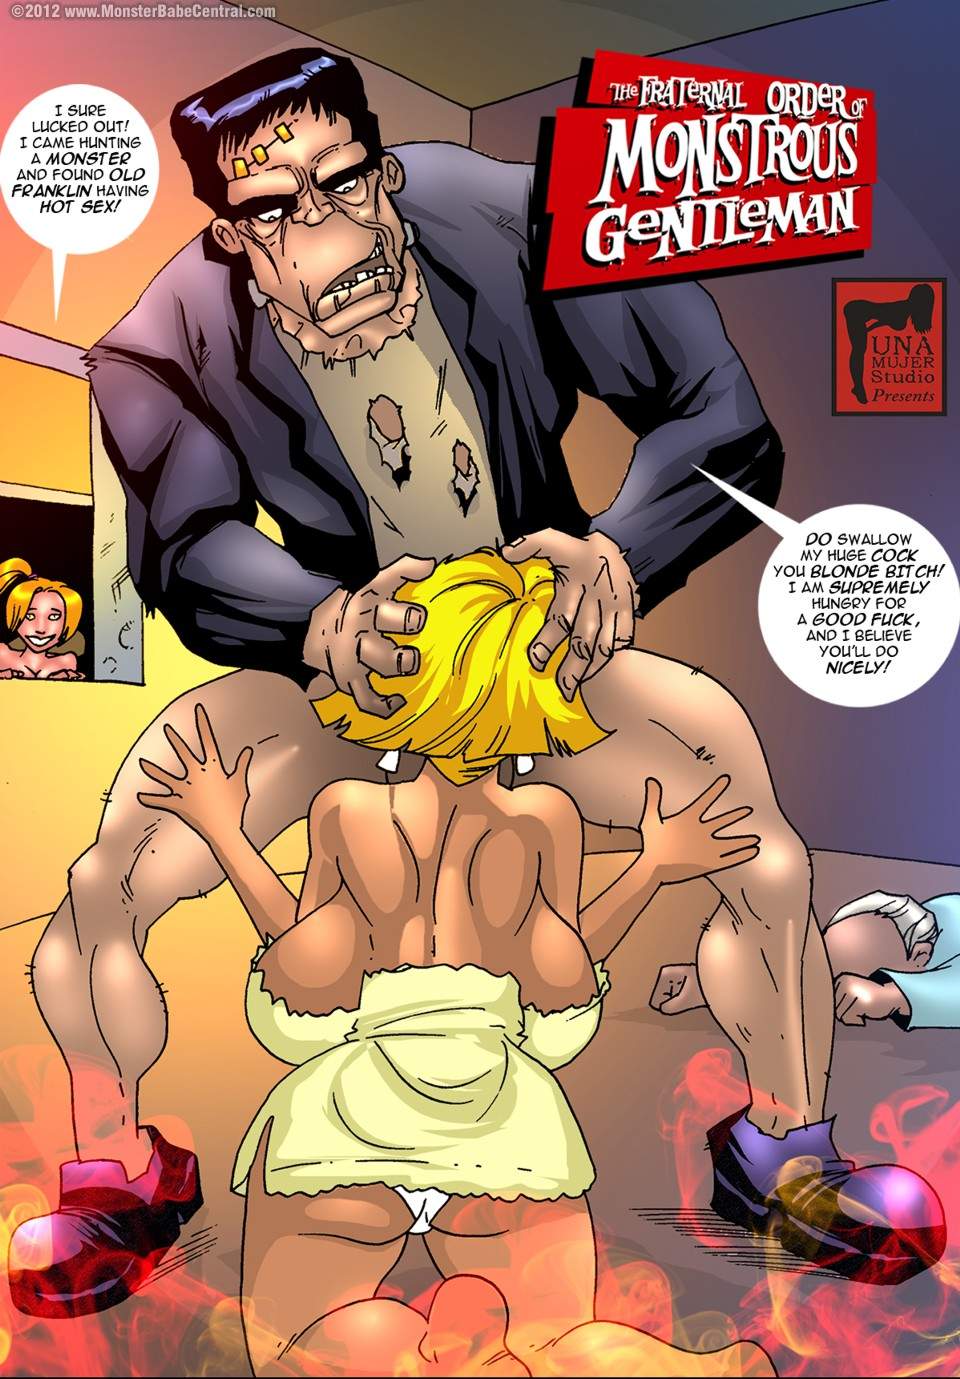 SureFap xxx porno Crossover - [MonsterBabeCentral] - The Fraternal Order of Monstrous Gentlemen! - Issue 13 - Franklin's Attack